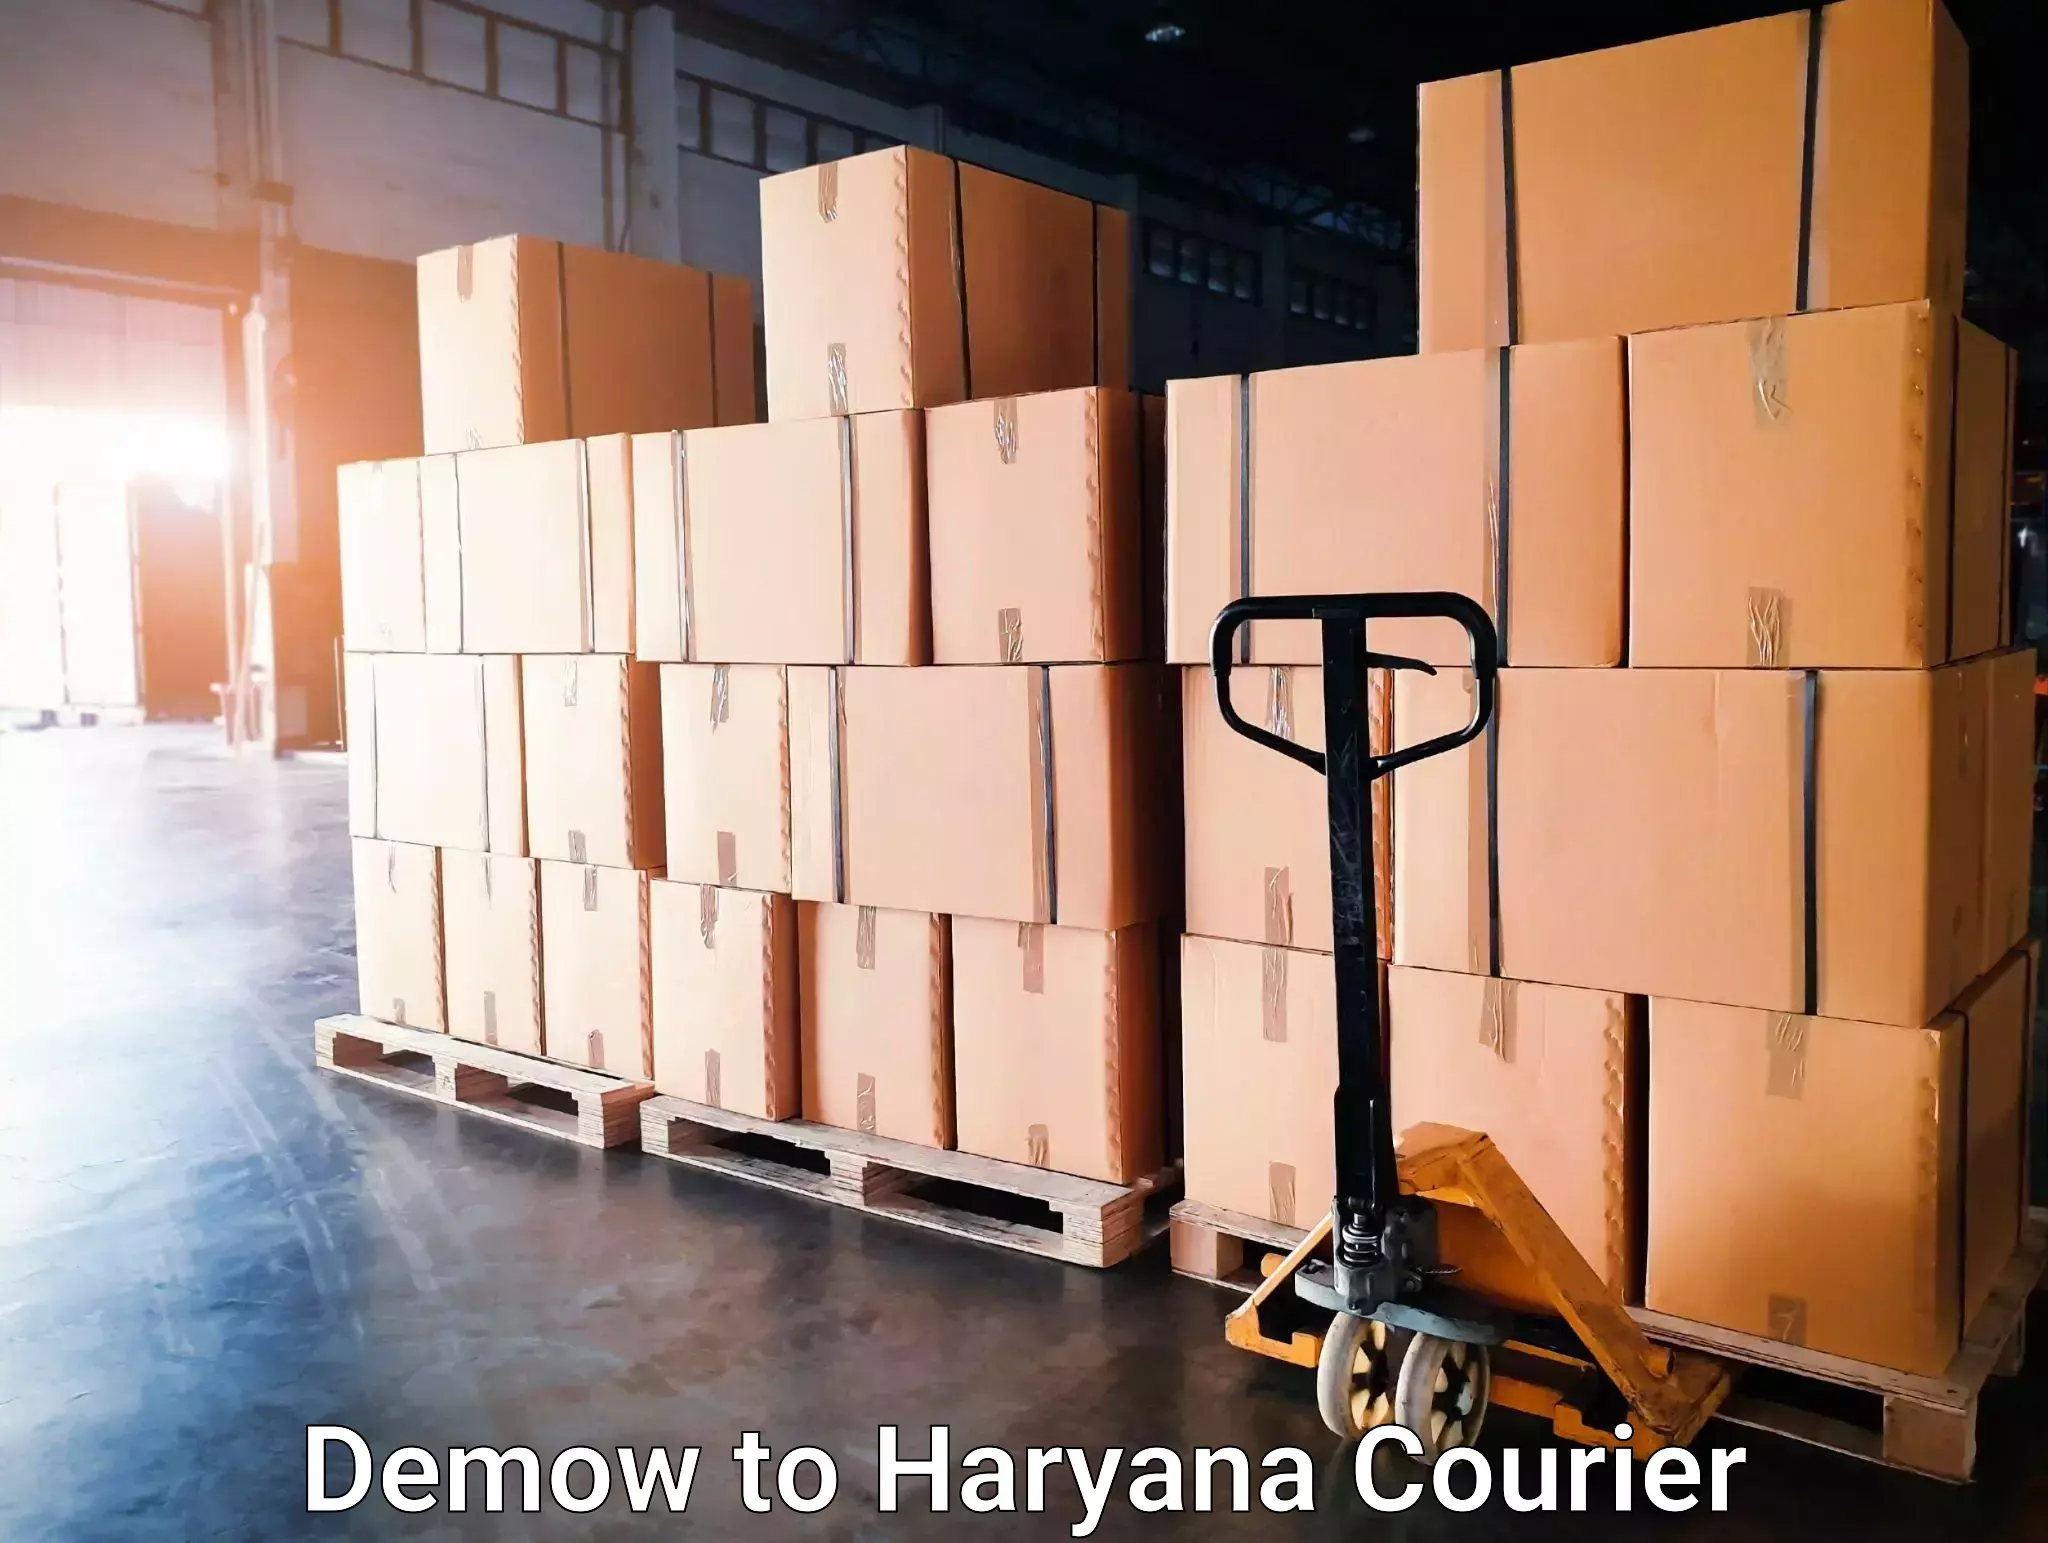 Weekend courier service in Demow to Gurugram